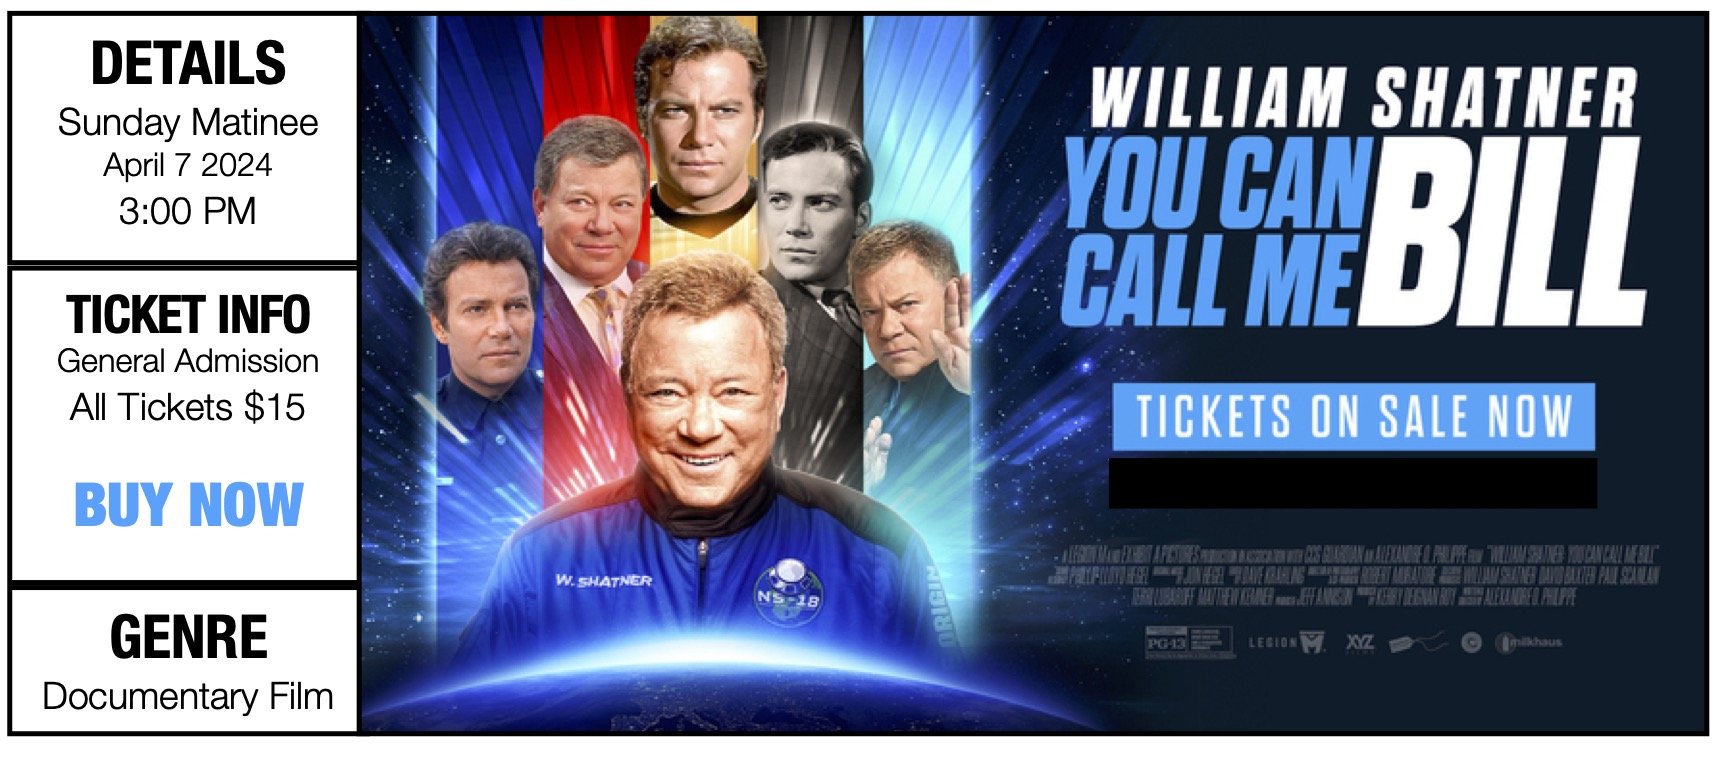 William Shatner: You Can Call Me Bill Sunday April 7 2024 3:00 PM